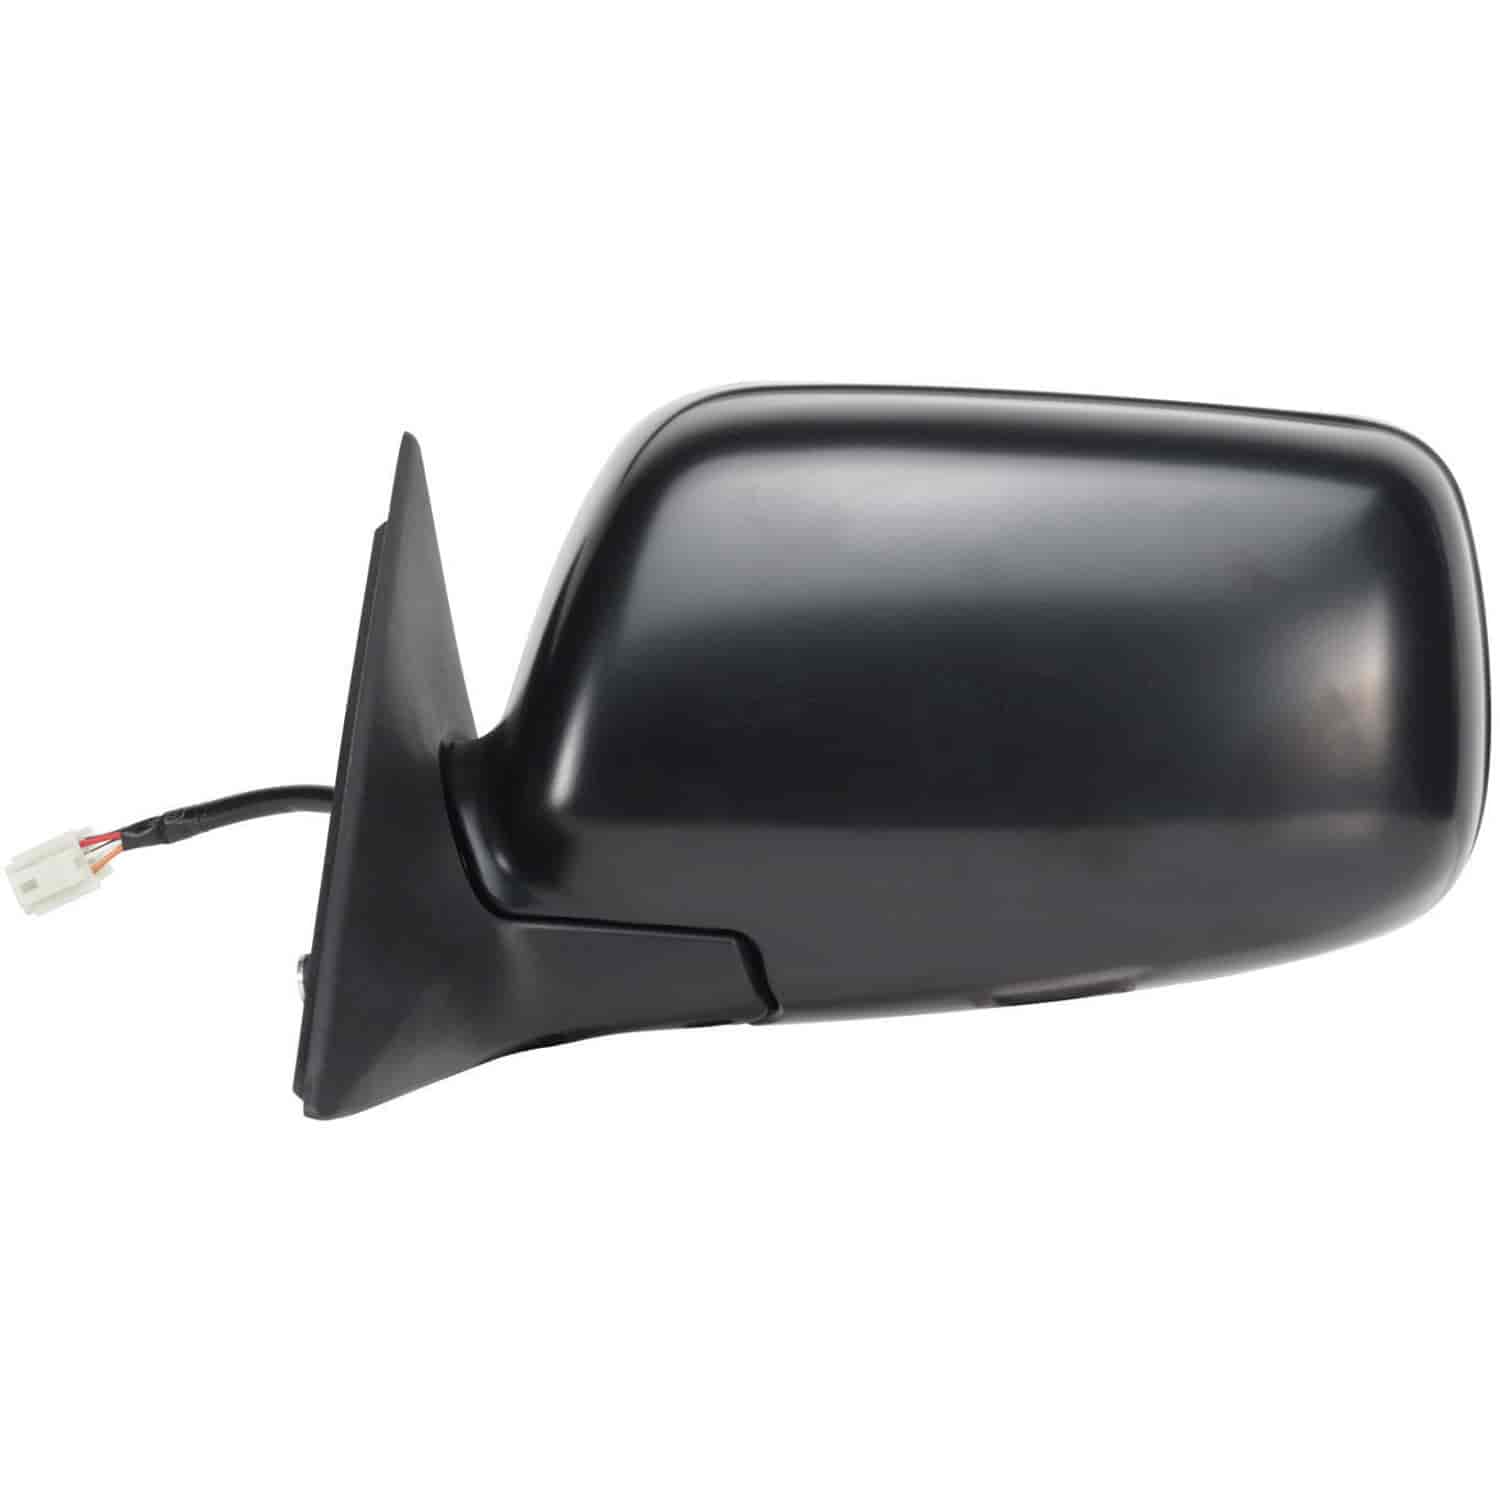 OEM Style Replacement mirror for 00-04 SUBARU Outback driver side mirror tested to fit and function